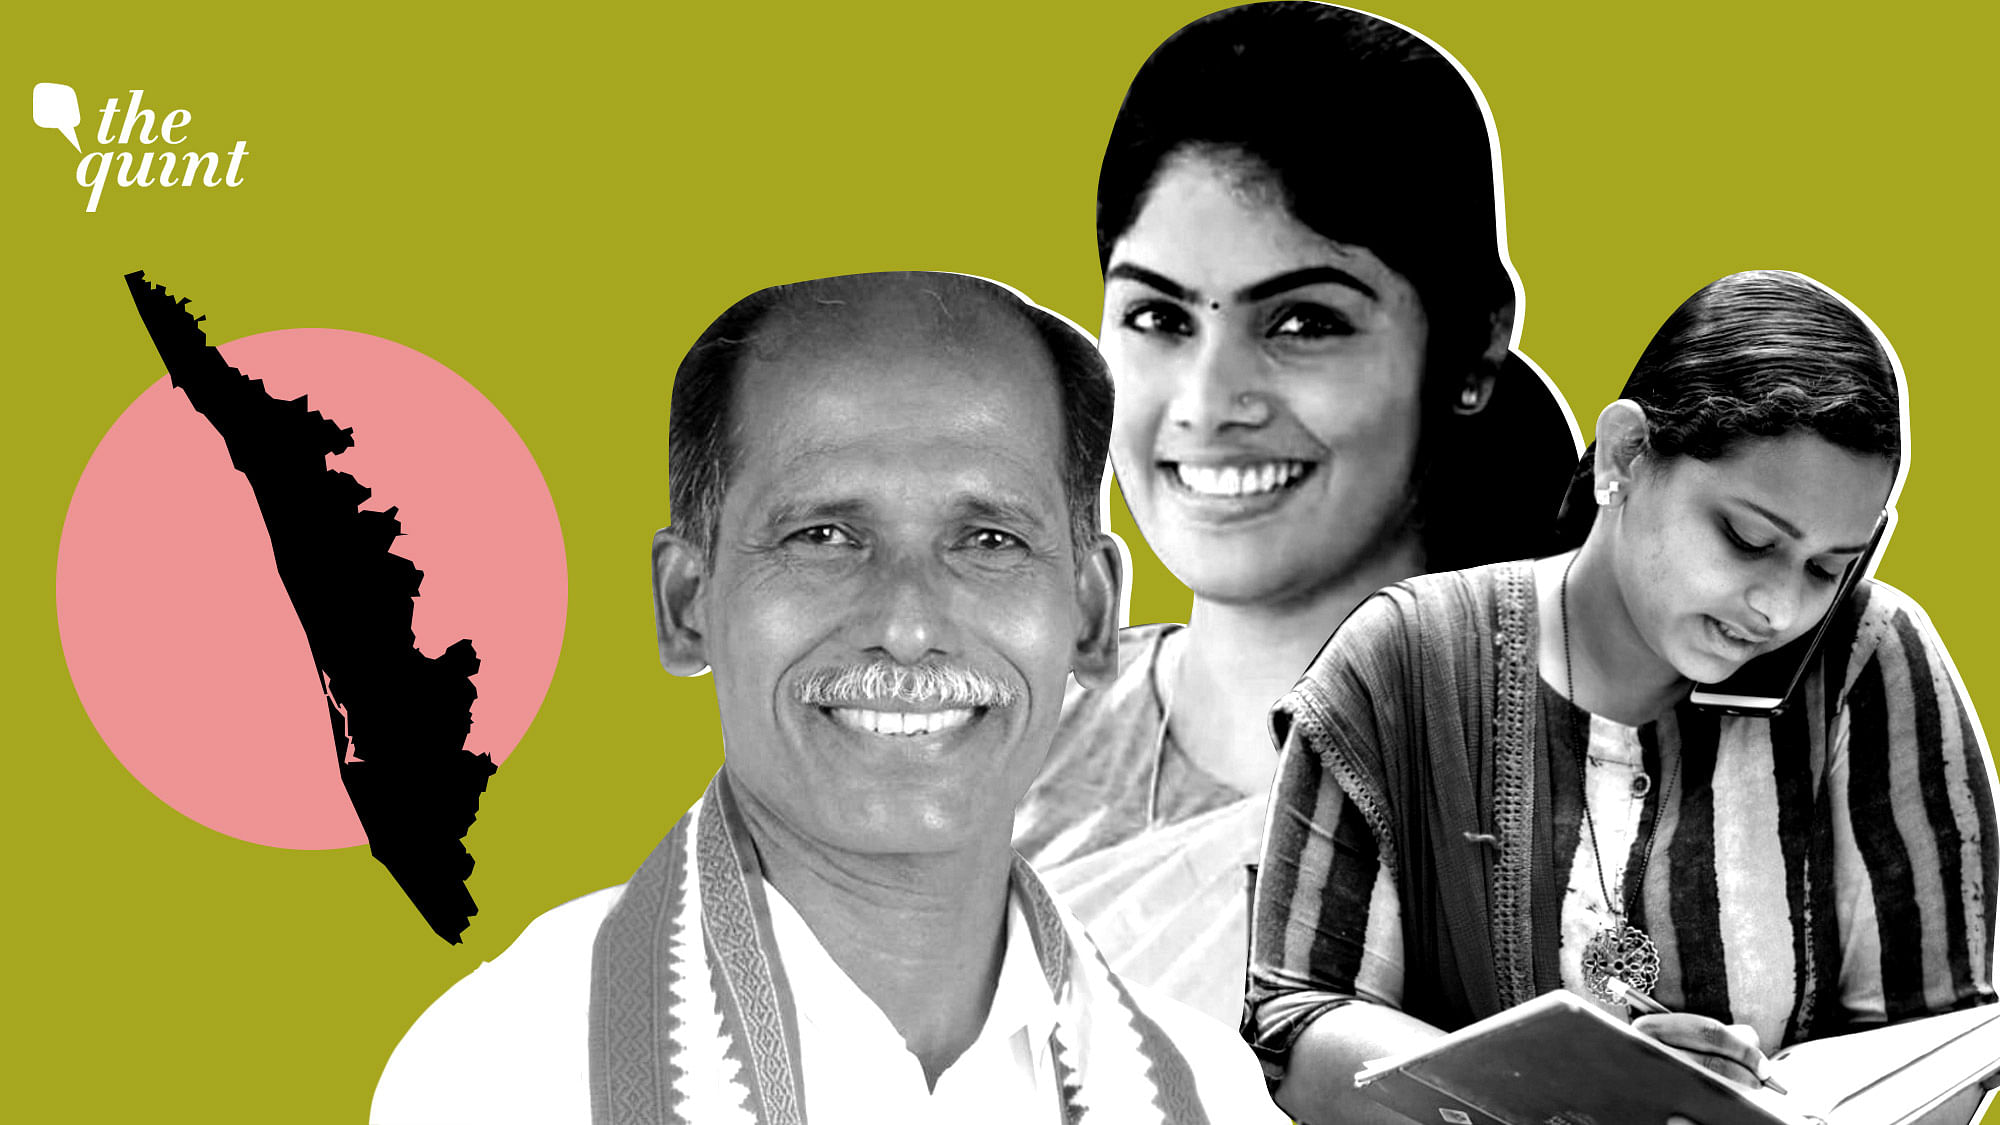 The upcoming local body elections in Kerala is quite interesting as there are several young and women candidates in the fray.